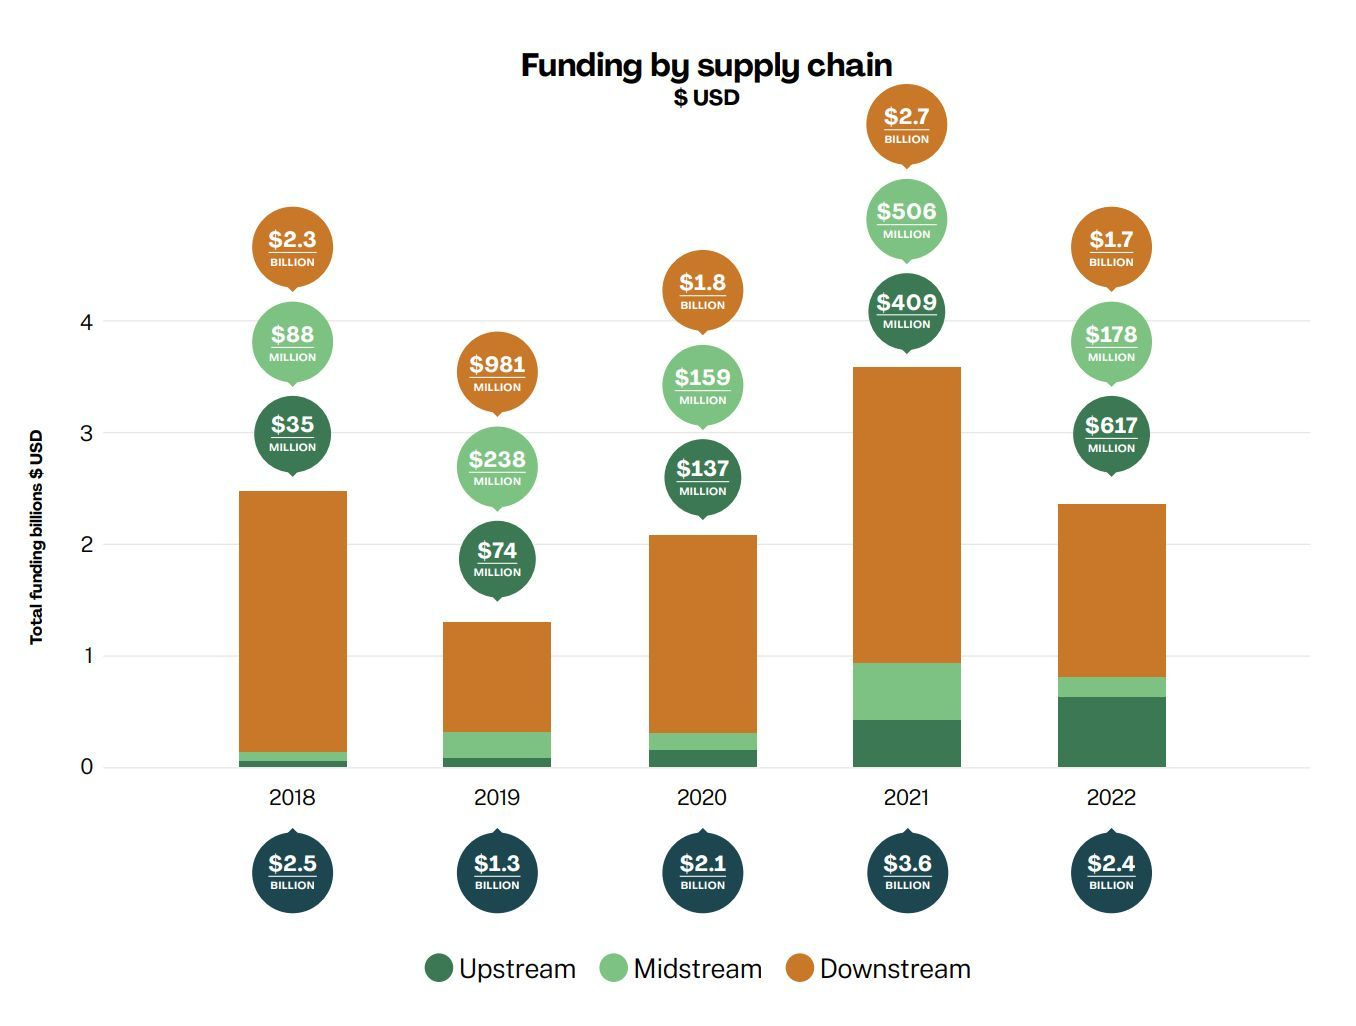 Agrifoodtech funding in India 2022. Source: AgFunder India AgriFoodTech Investment Report 2023